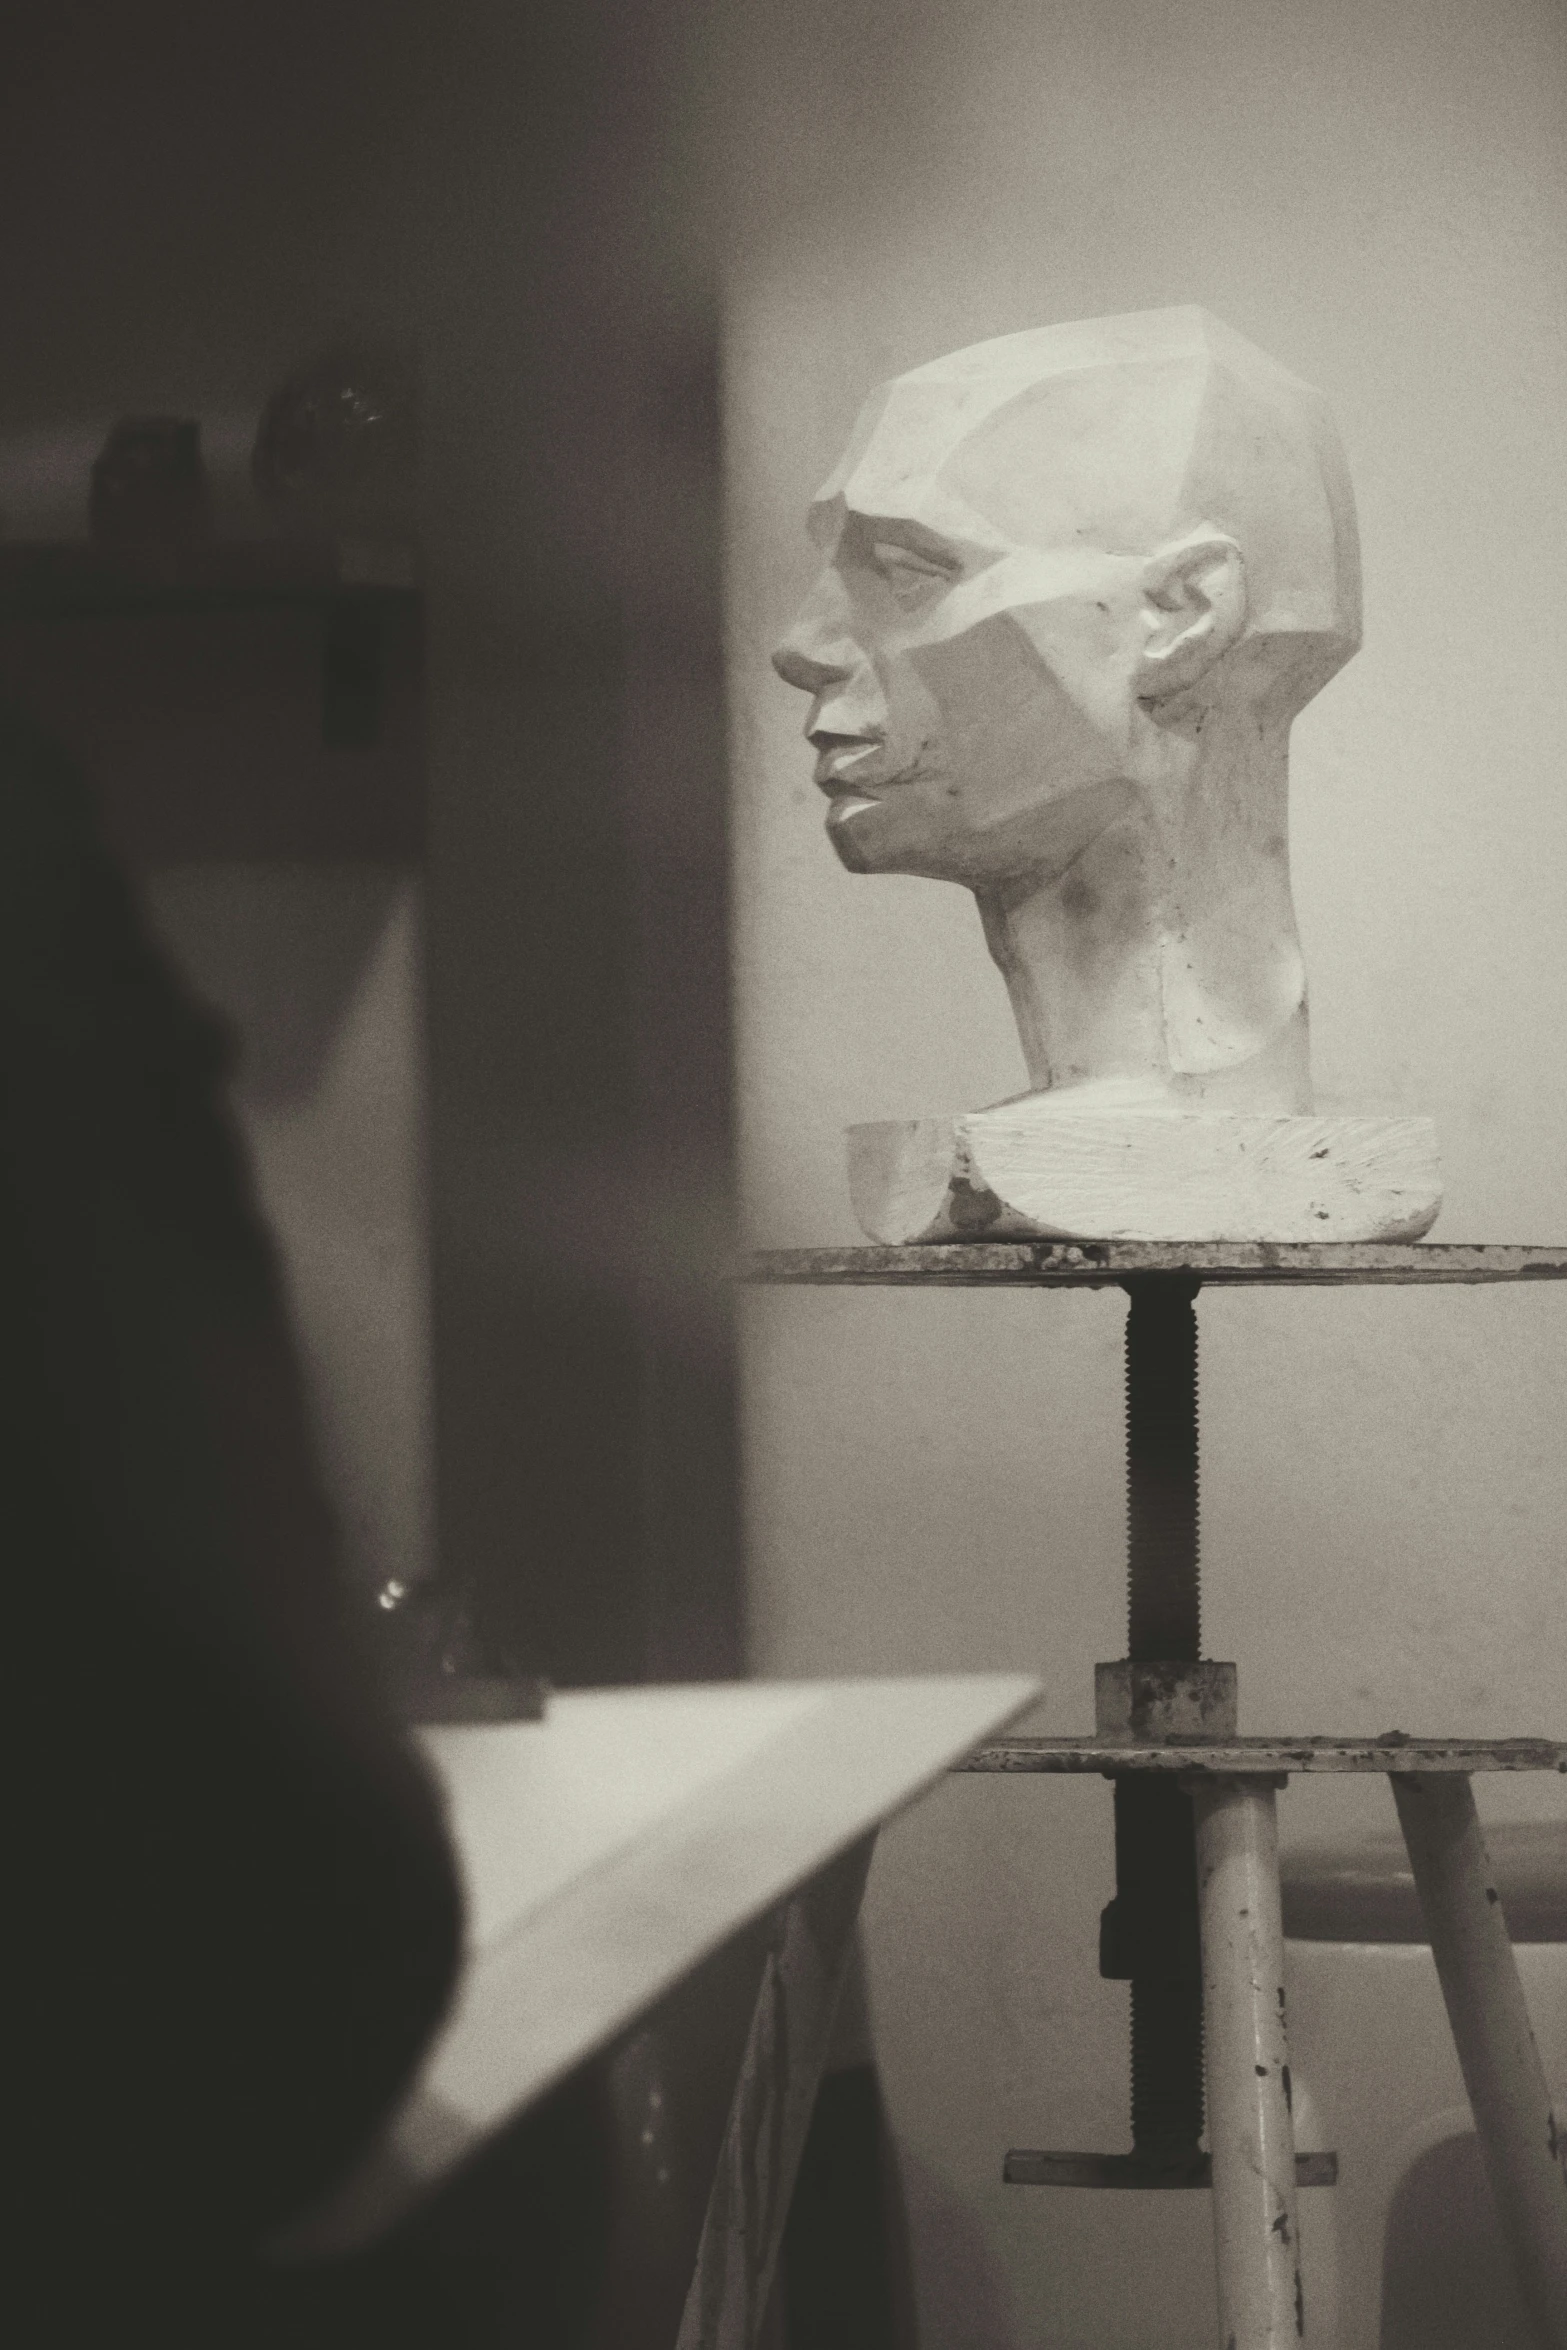 the statue of a man is in progress